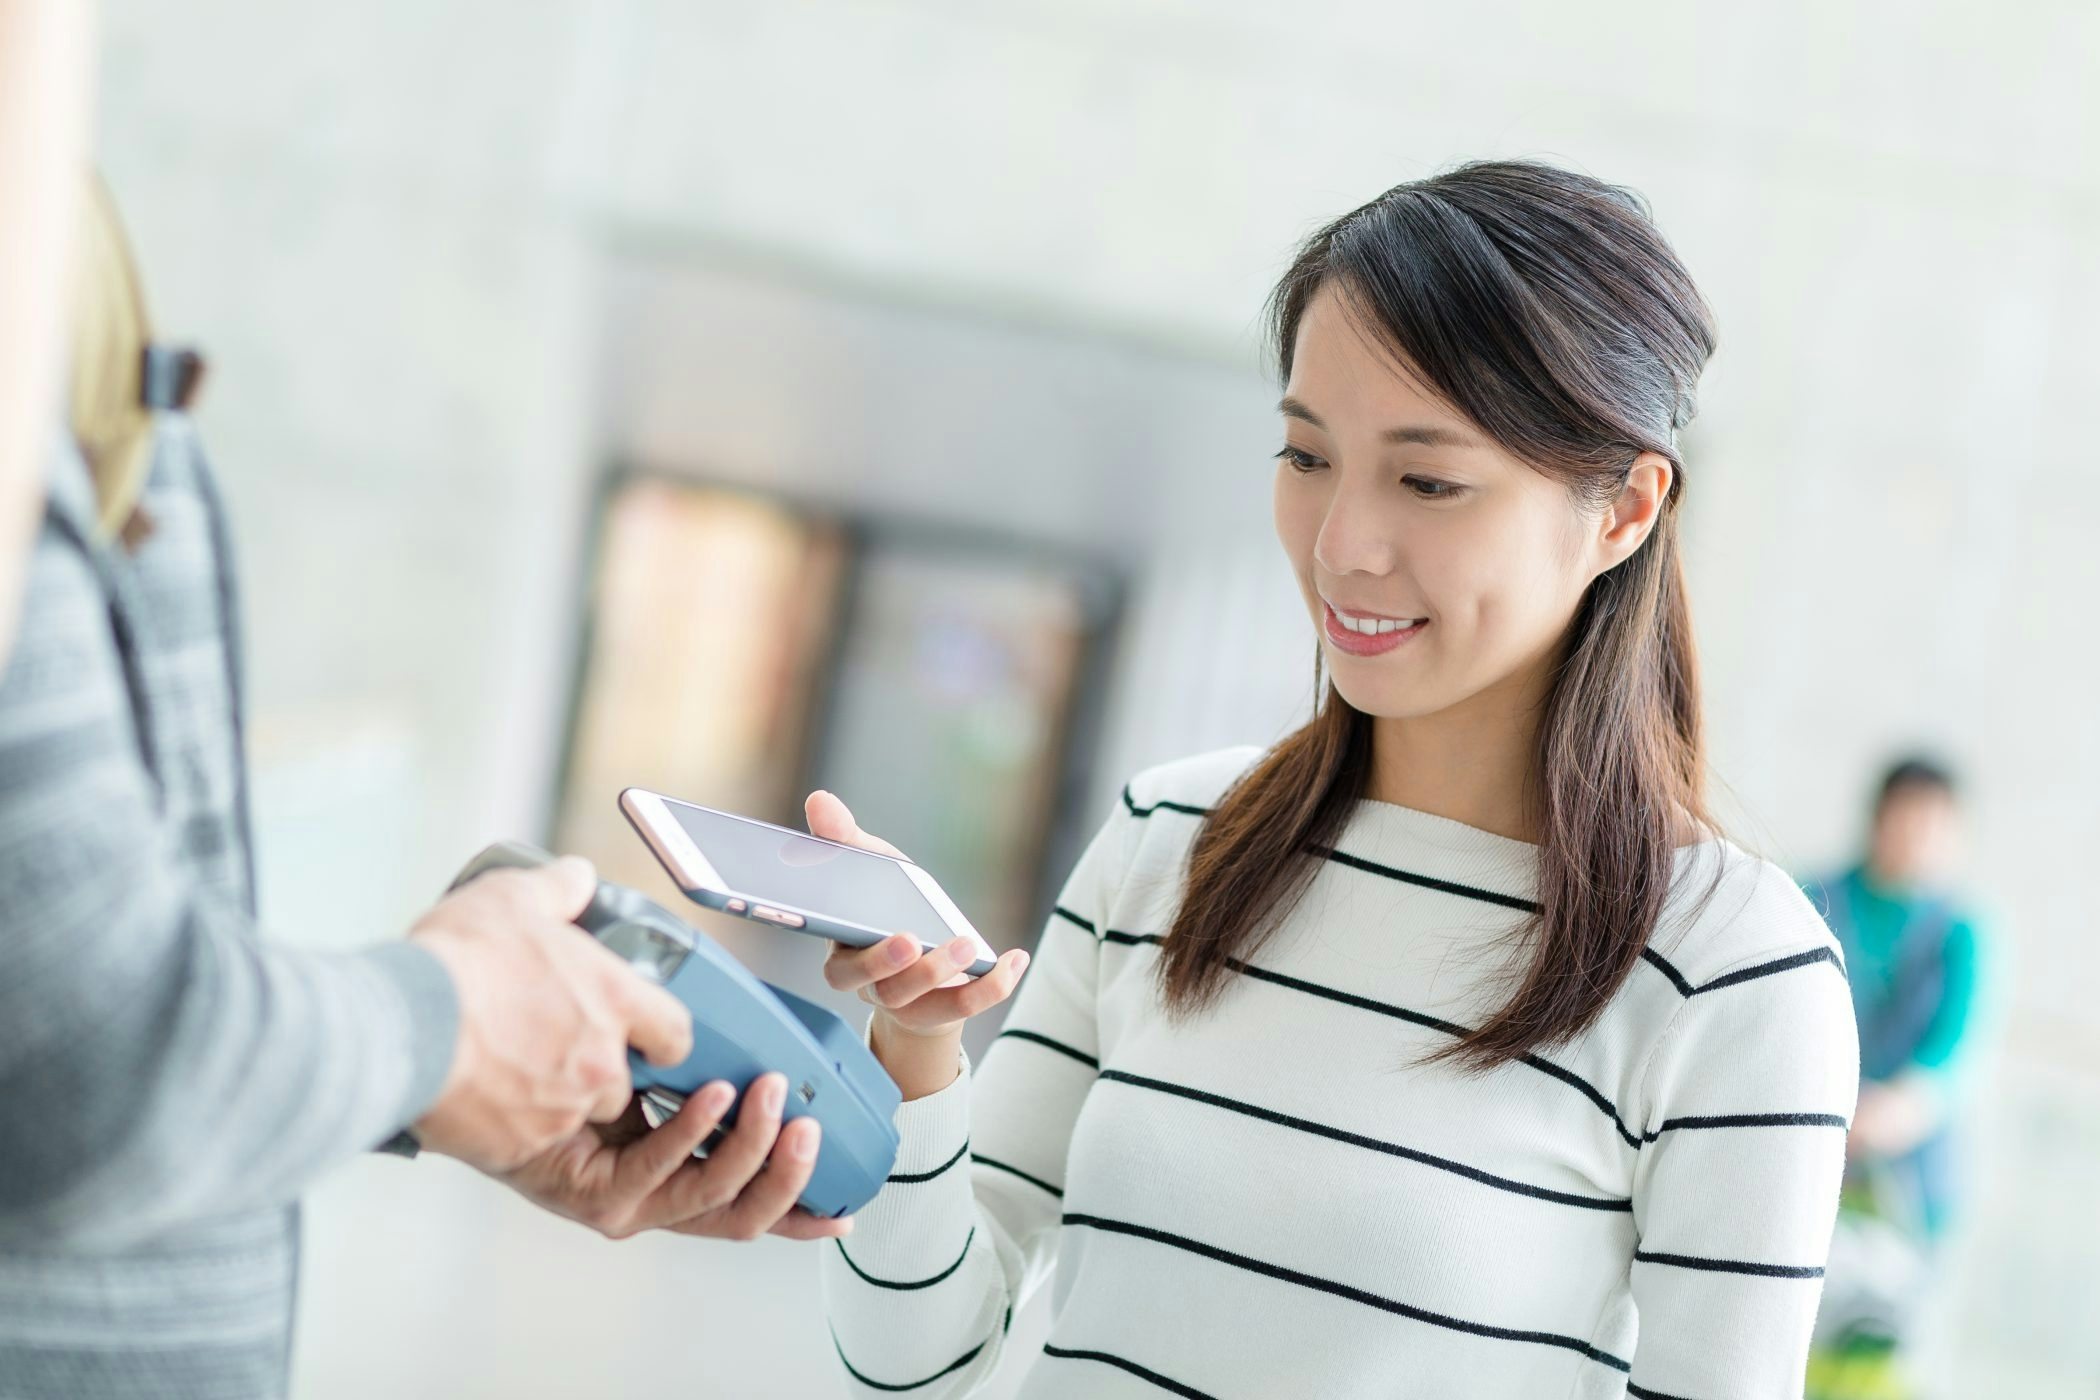 Alipay is extending its network to popular destinations for Chinese tourists. (leungchopan / Shutterstock.com)